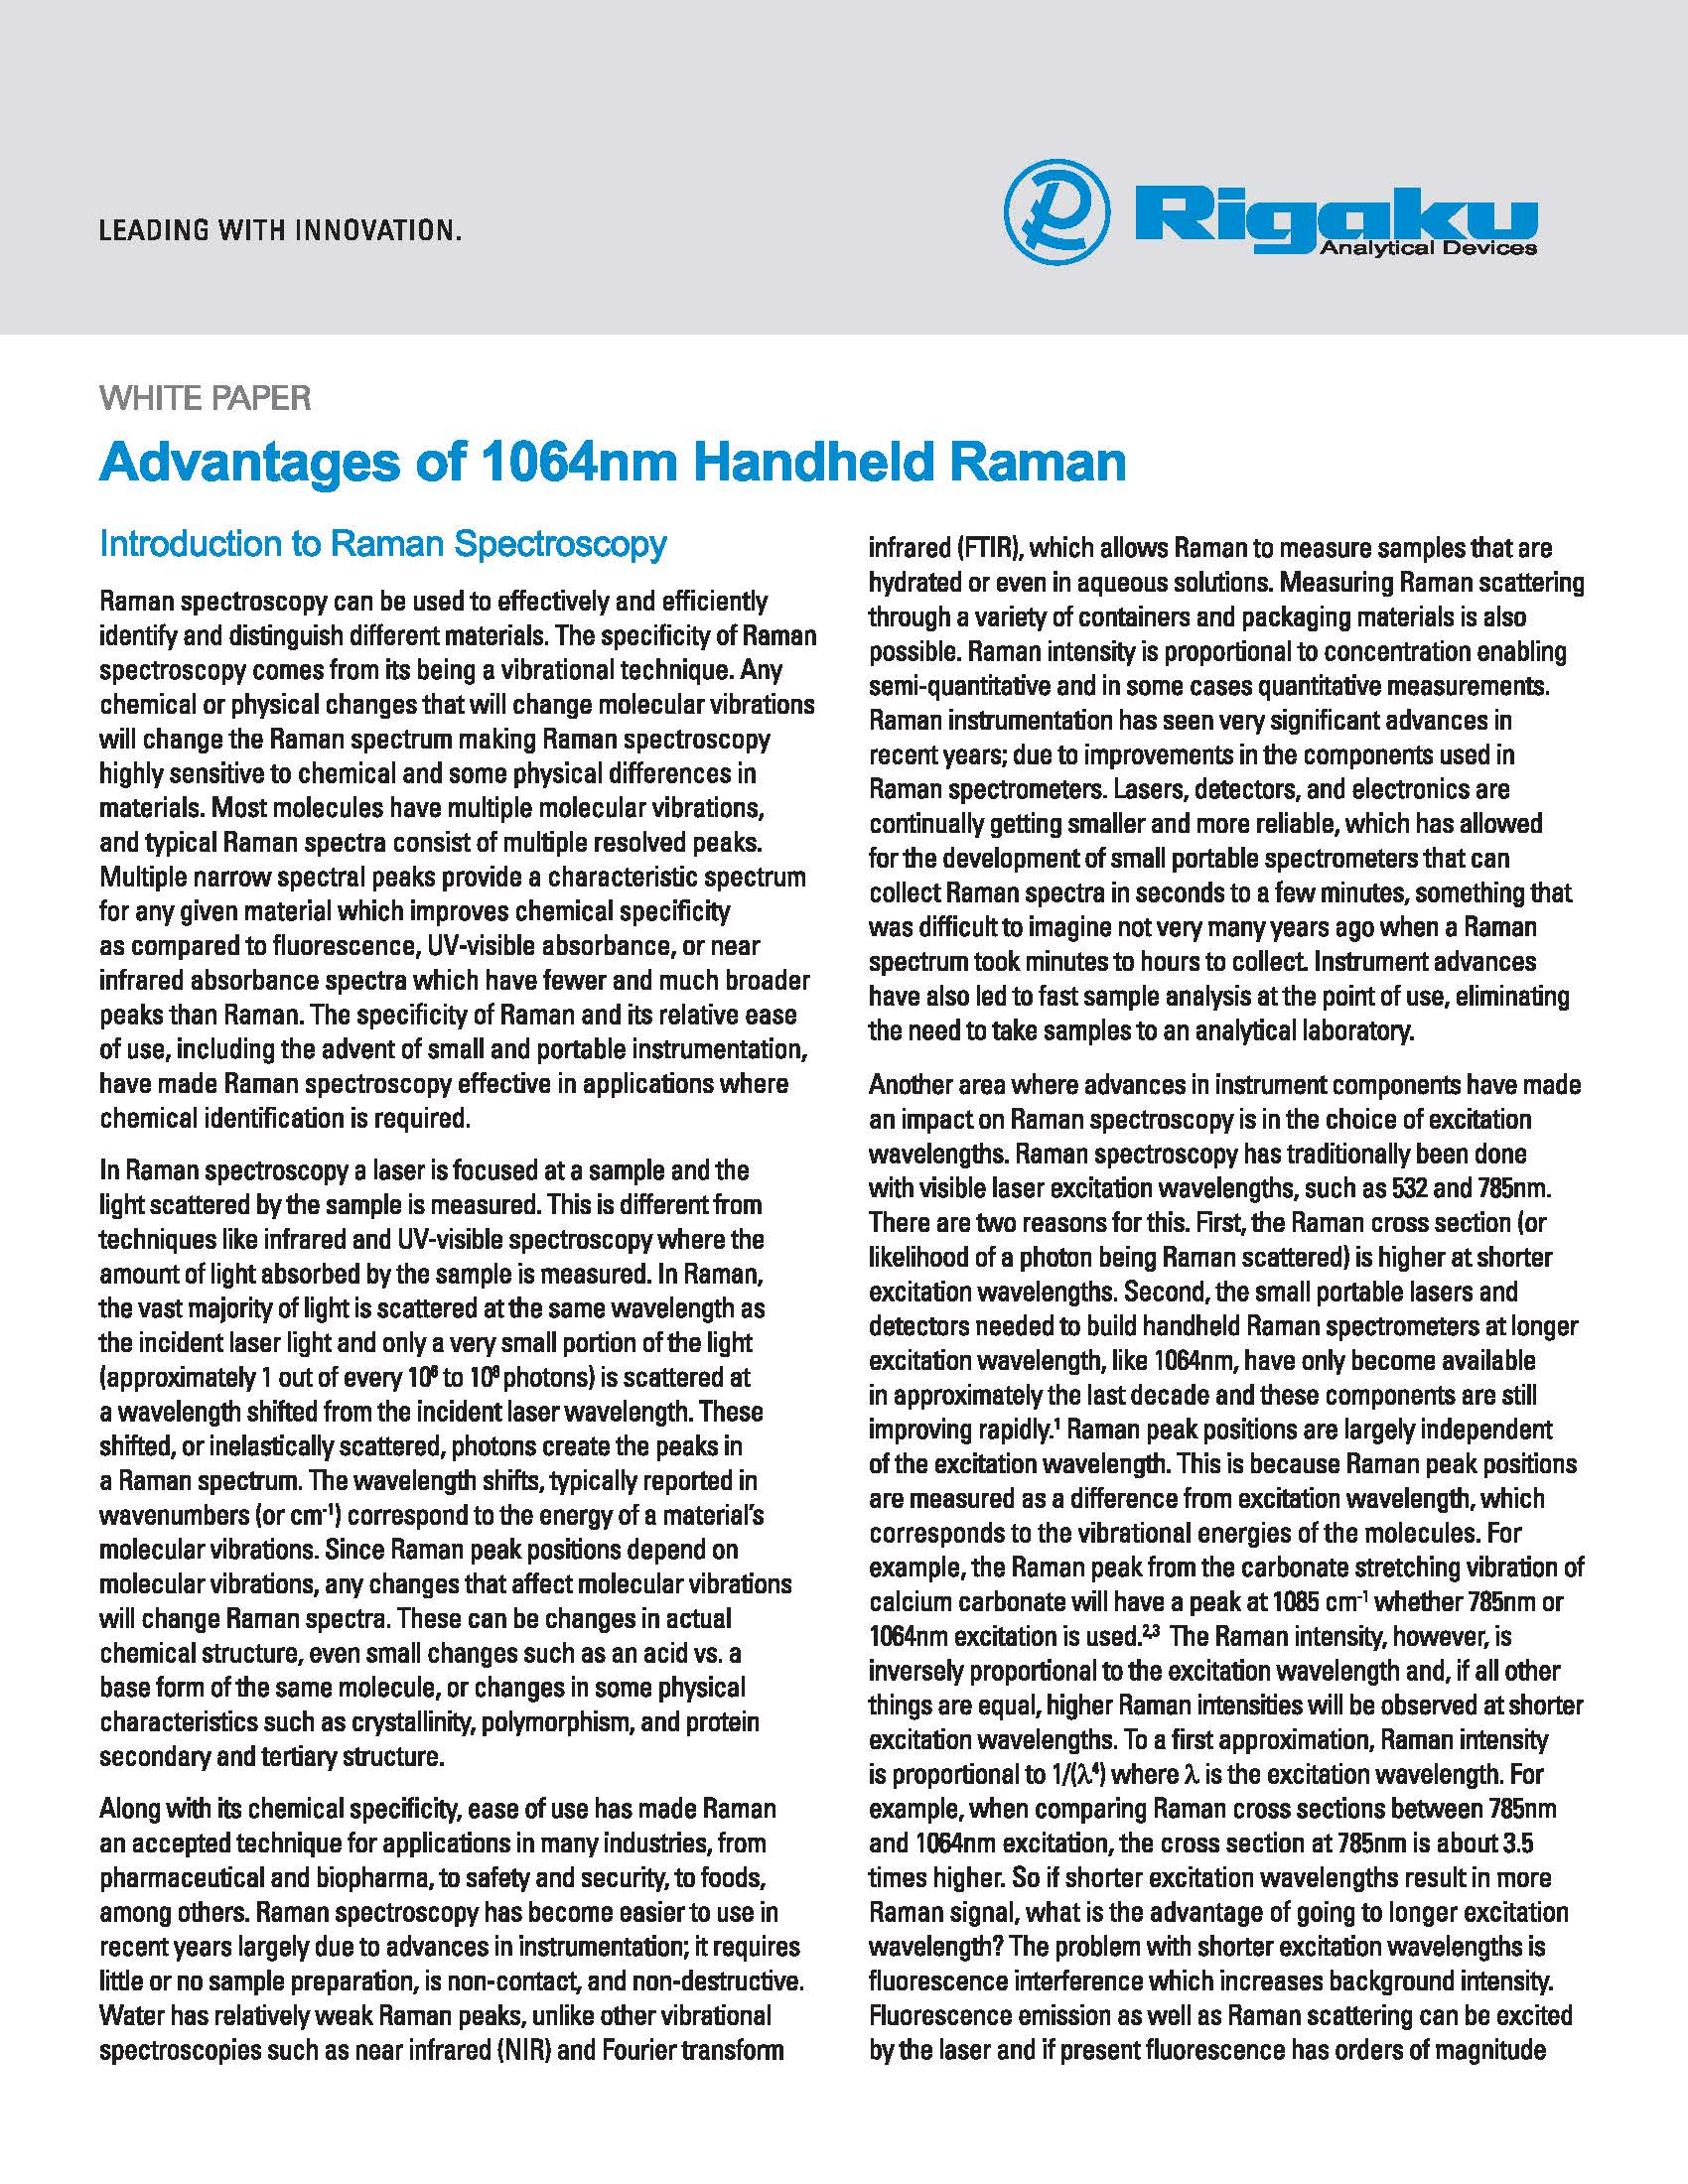 White paper - Advantages of 1064nm Handheld Raman_Page_01